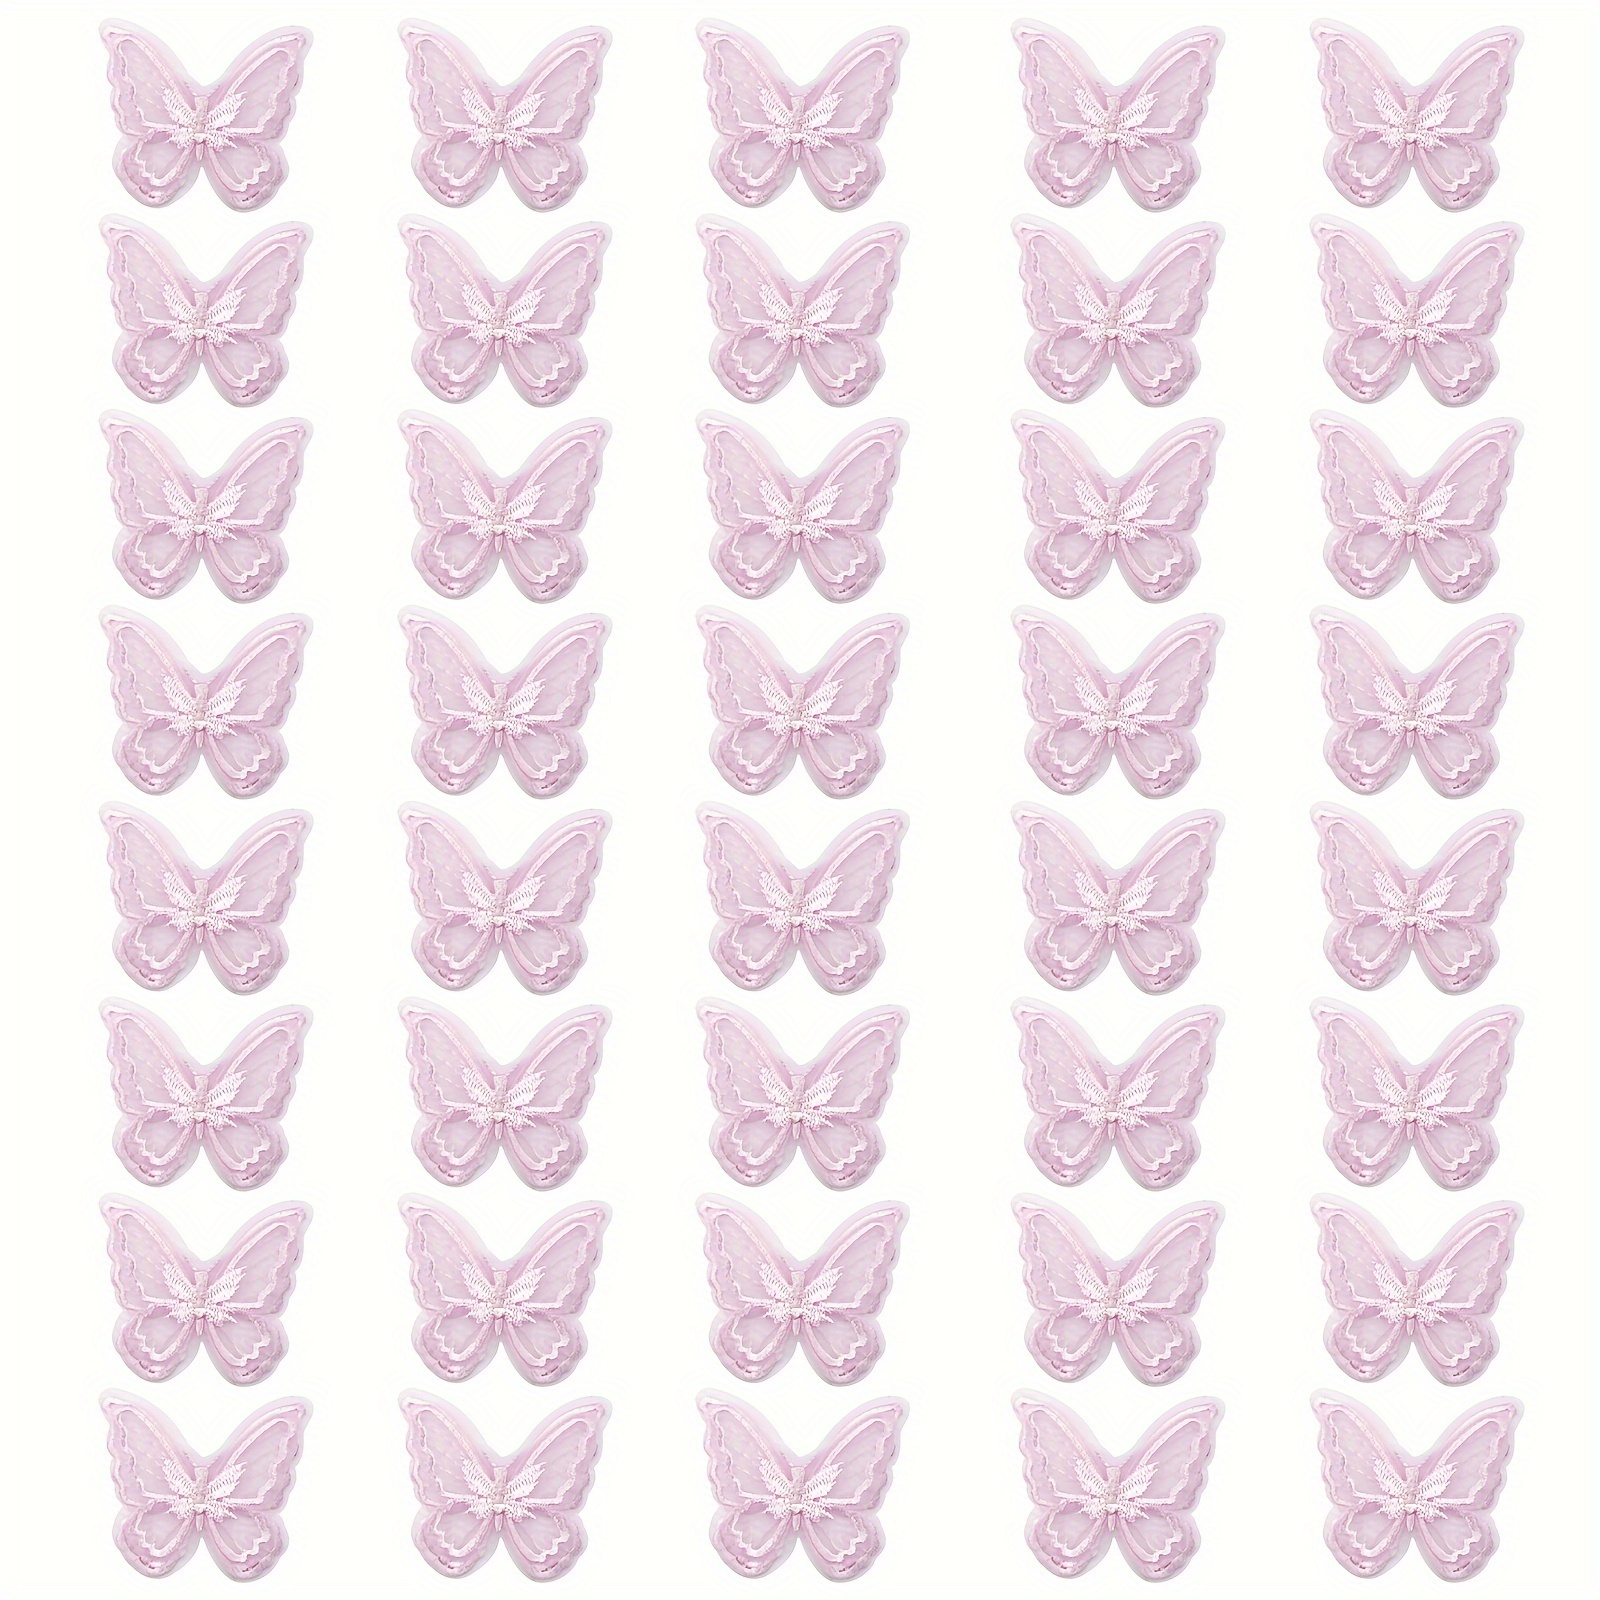  30 Pcs Pink Lace Butterfly Applique Embroidery,Organza